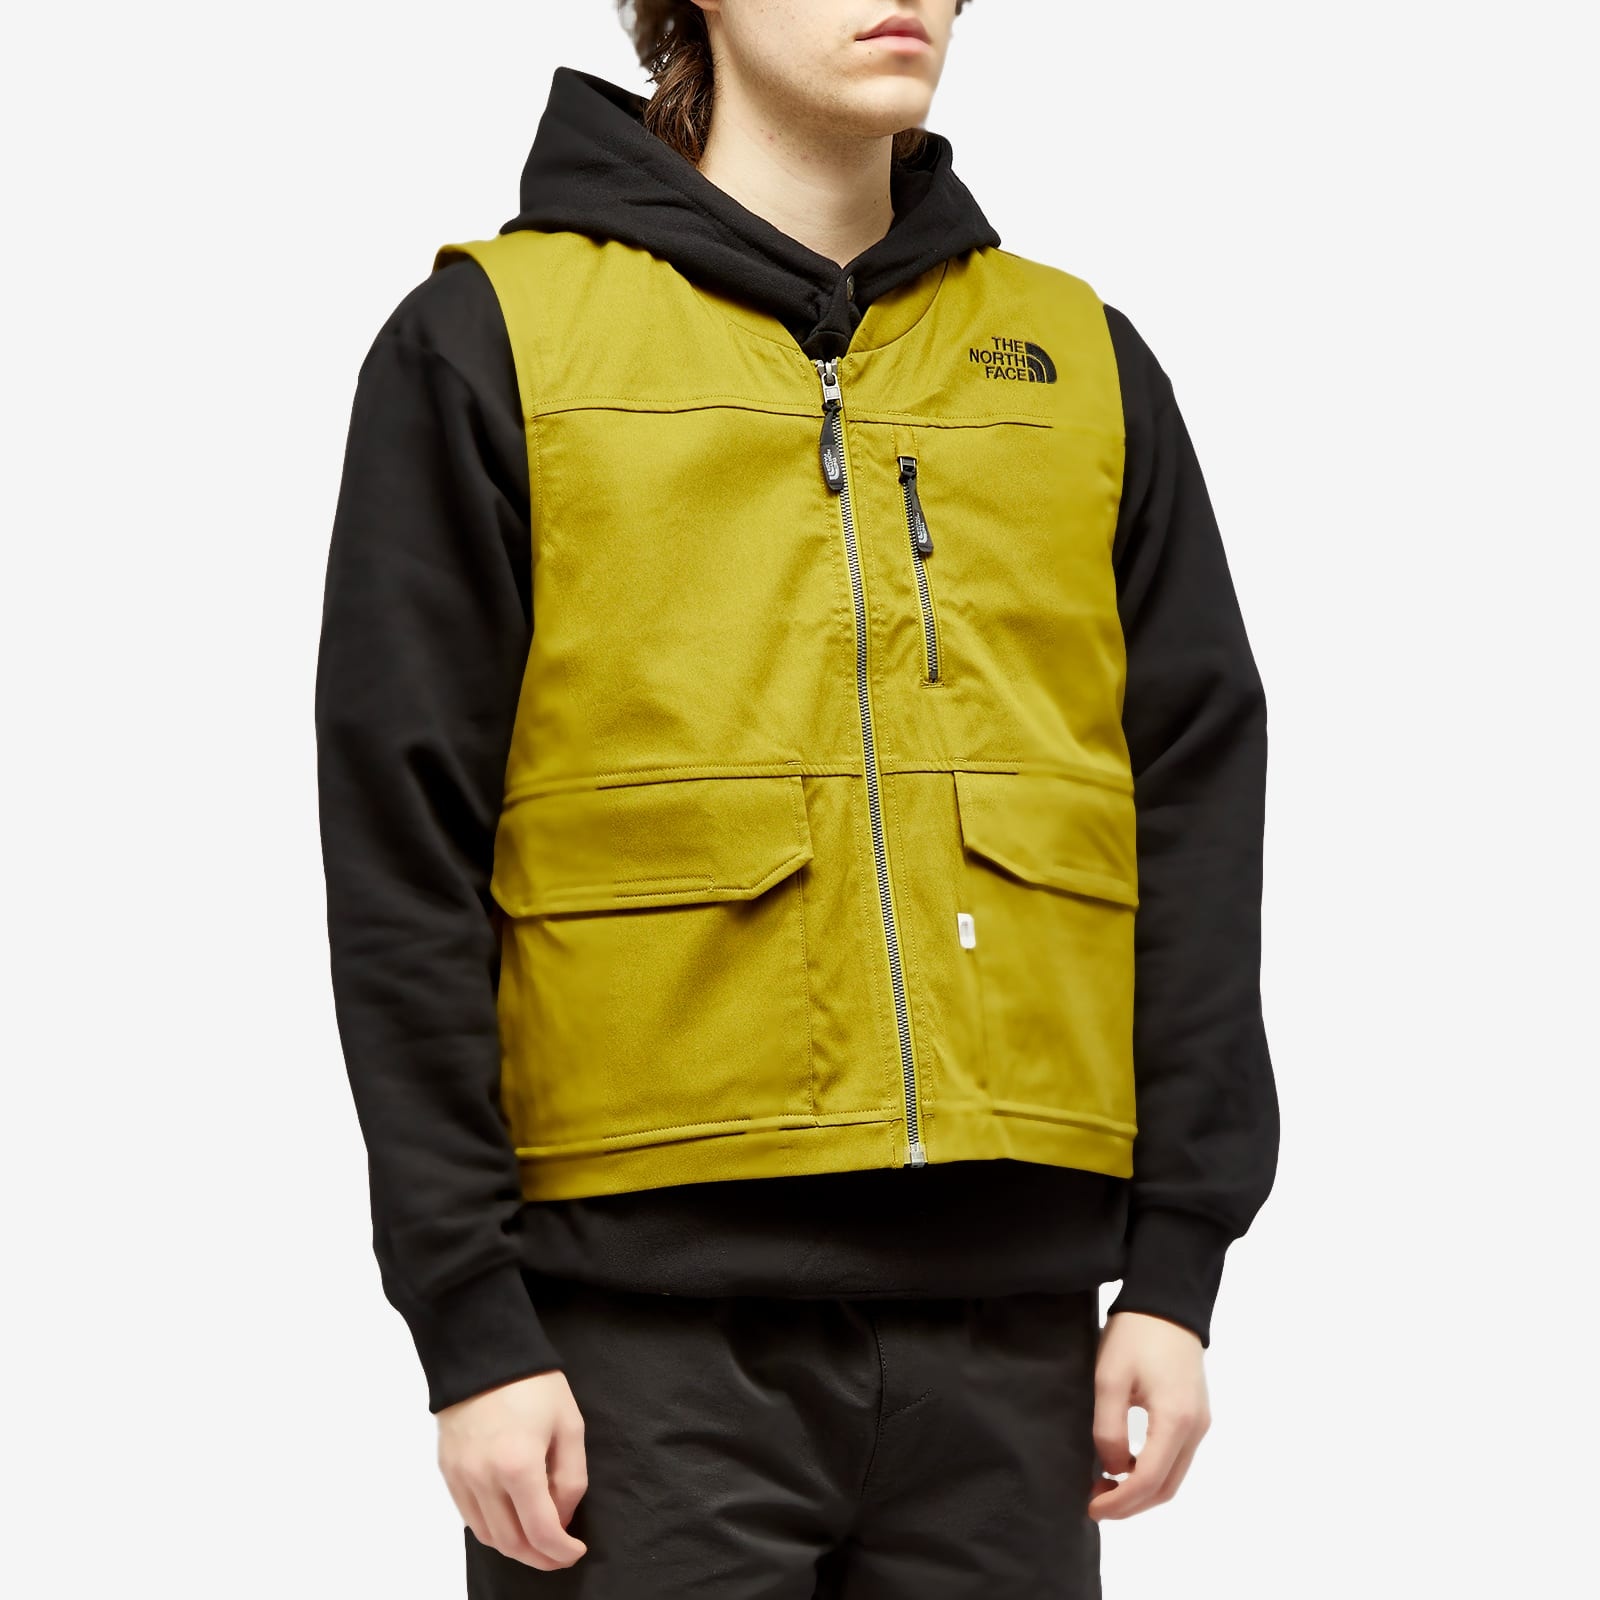 The North Face Heritage Cotton Vest - 2